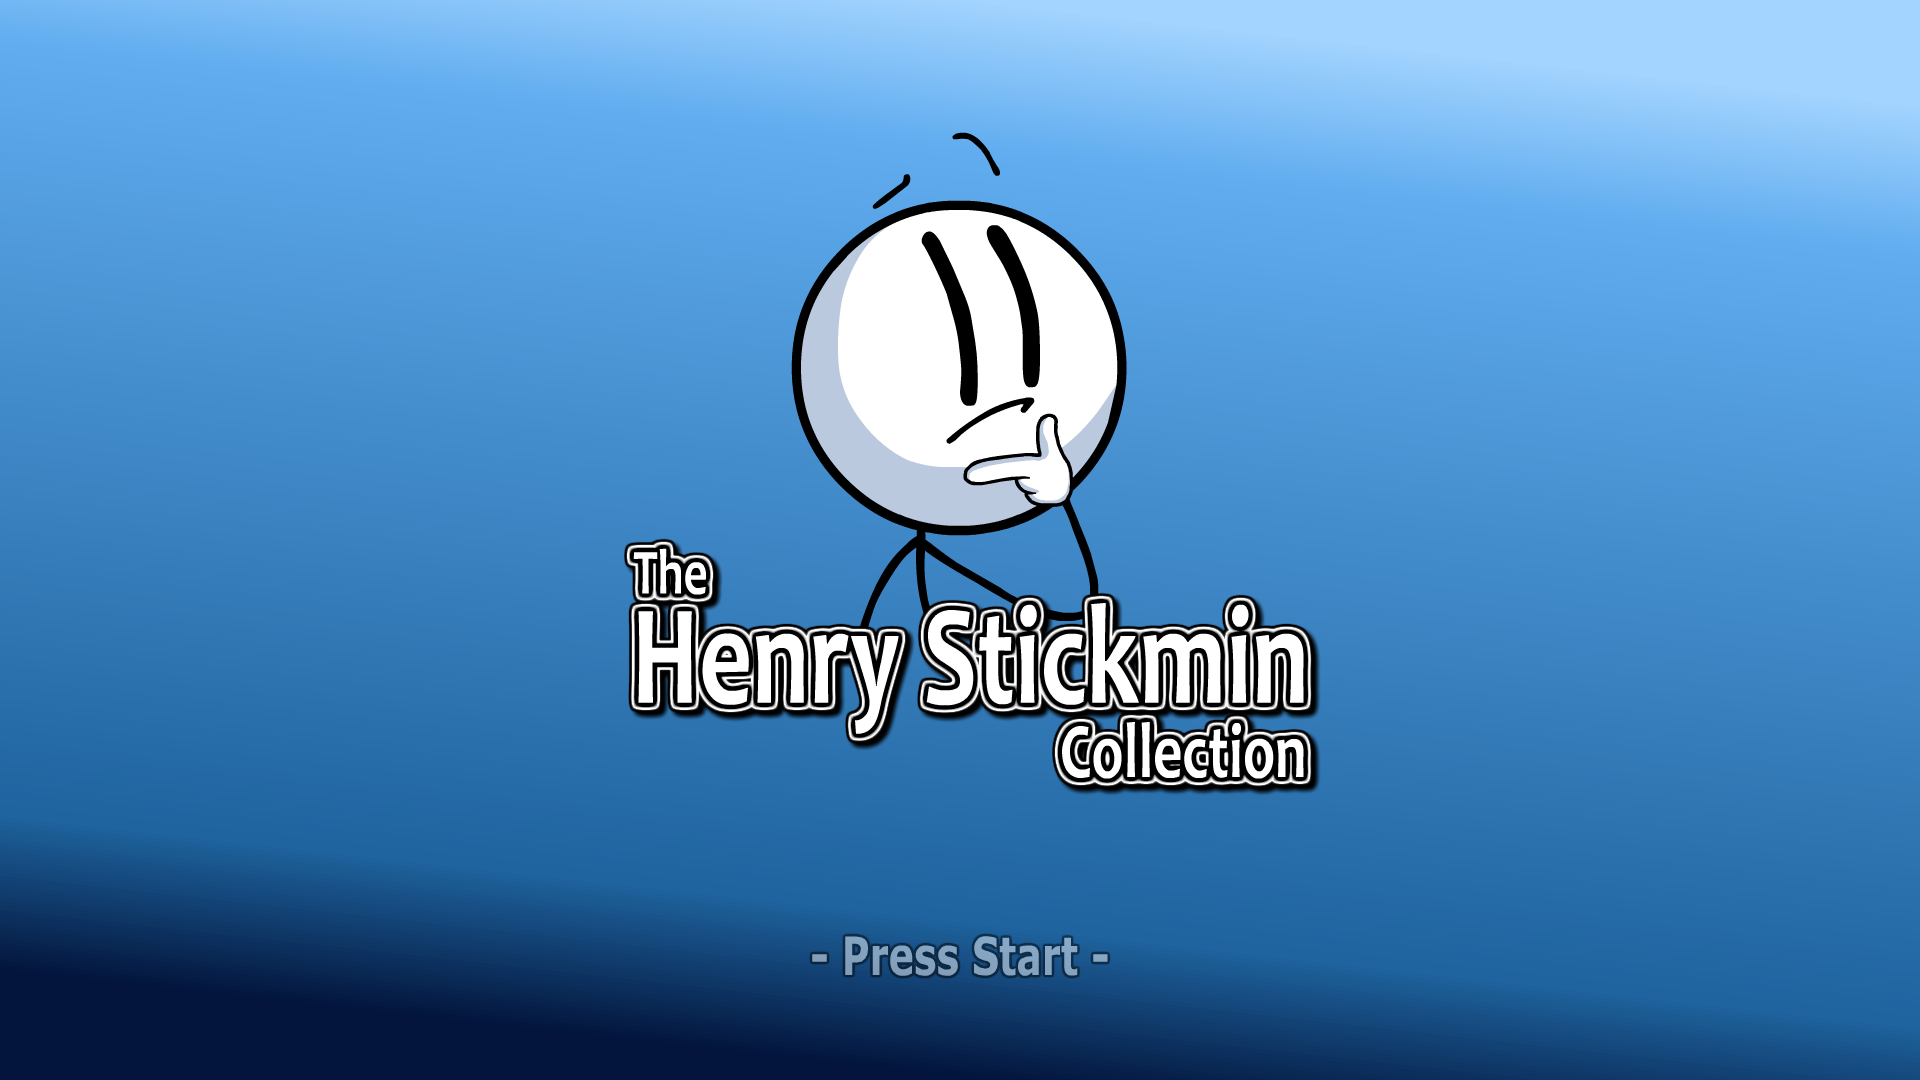 The henry stickman collection на андроид. The Henry Stickman collection логотип. Henry Stickman collection Постер.